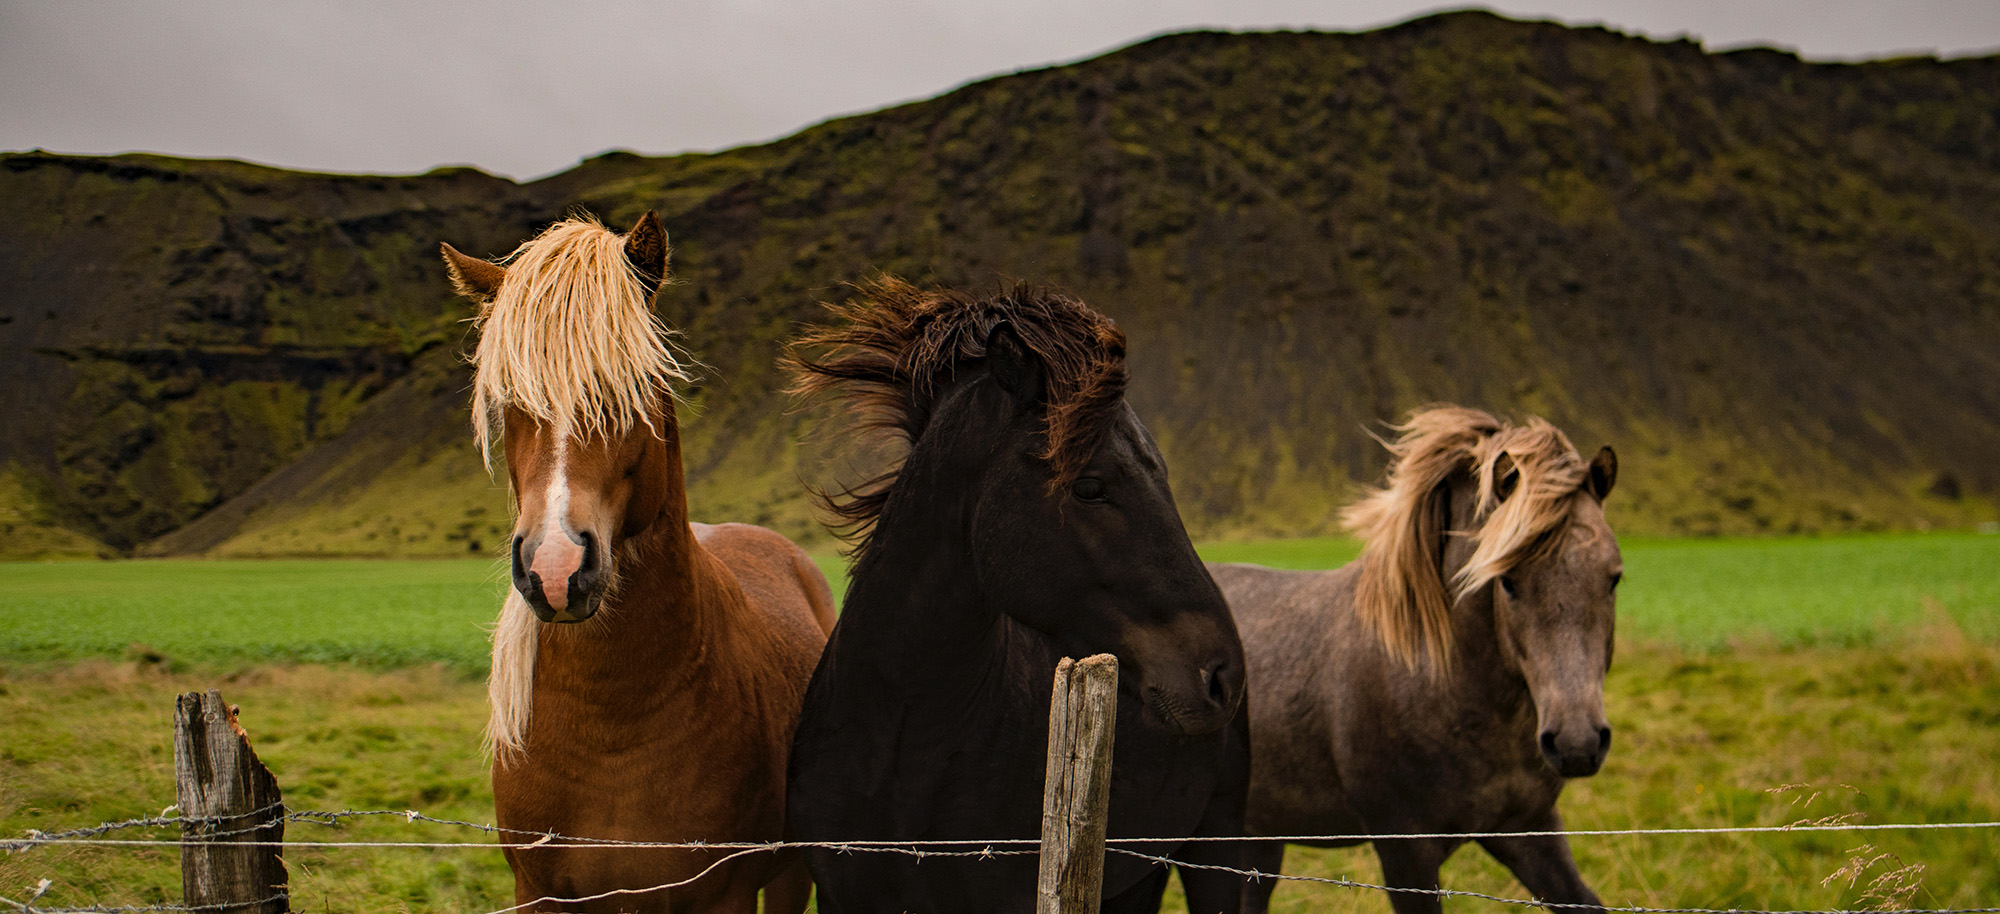 horses outside in a green pasture with mountains in the background